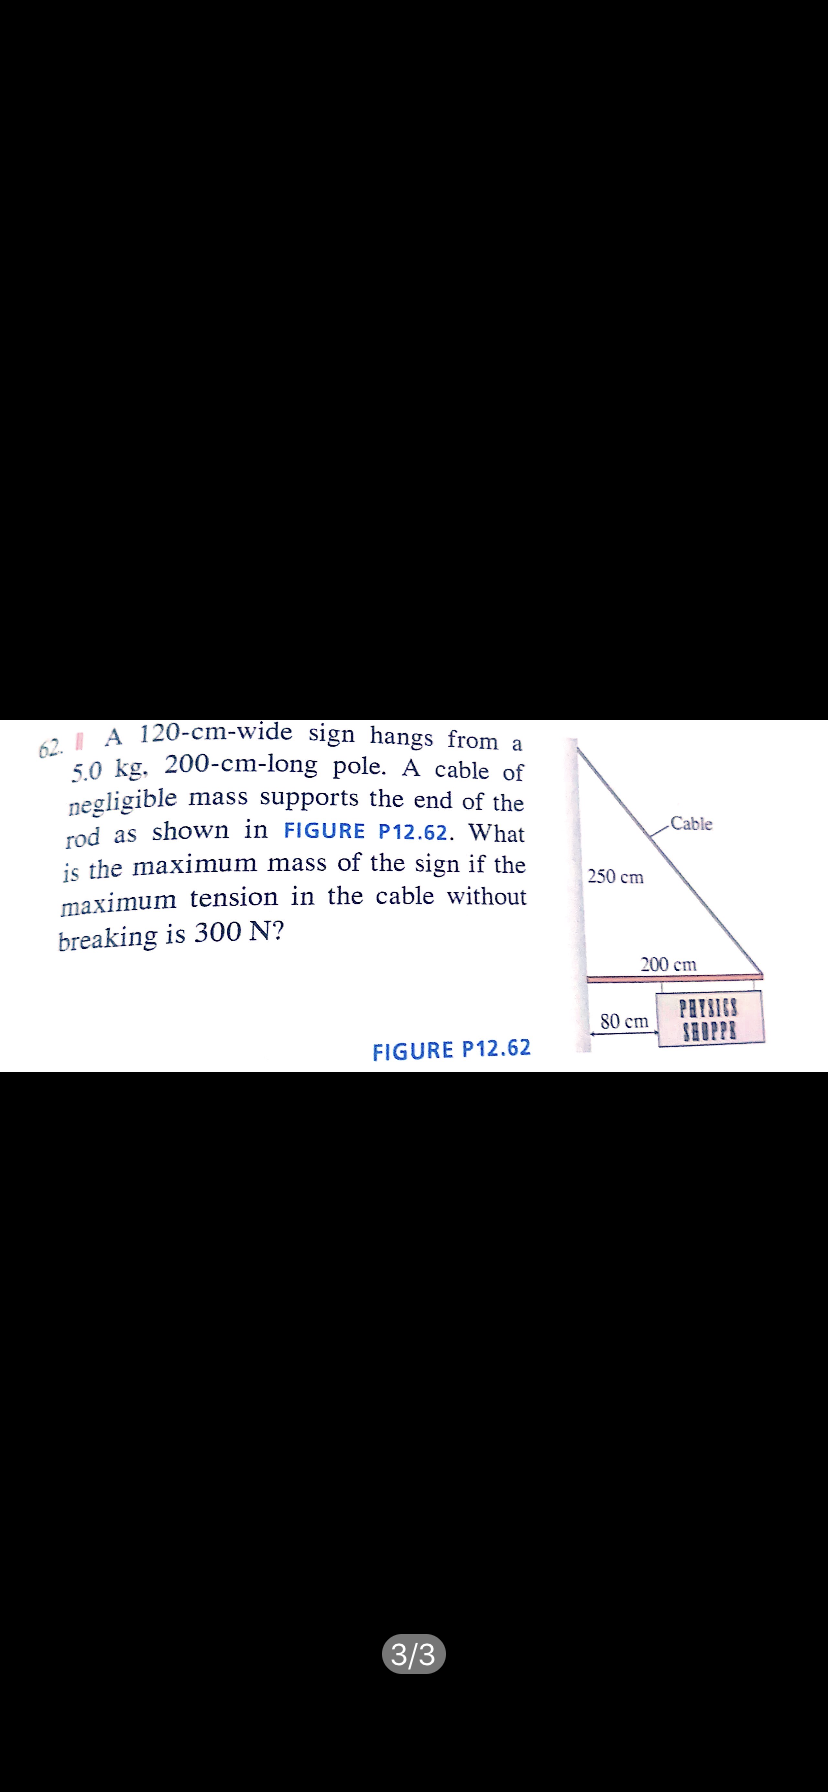 62. I A 120-cm-wide sign hangs from a
5.0 kg. 200-cm-long pole. A cable of
negligible mass supports the end of the
rod as shown in FIGURE P12.62. What
is the maximum mass of the sign if the
maximum tension in the cable without
Cable
250 cm
breaking is 300 N?
200 cm
PRISICS
SHOPPE
80 cm
FIGURE P12.62
3/3
